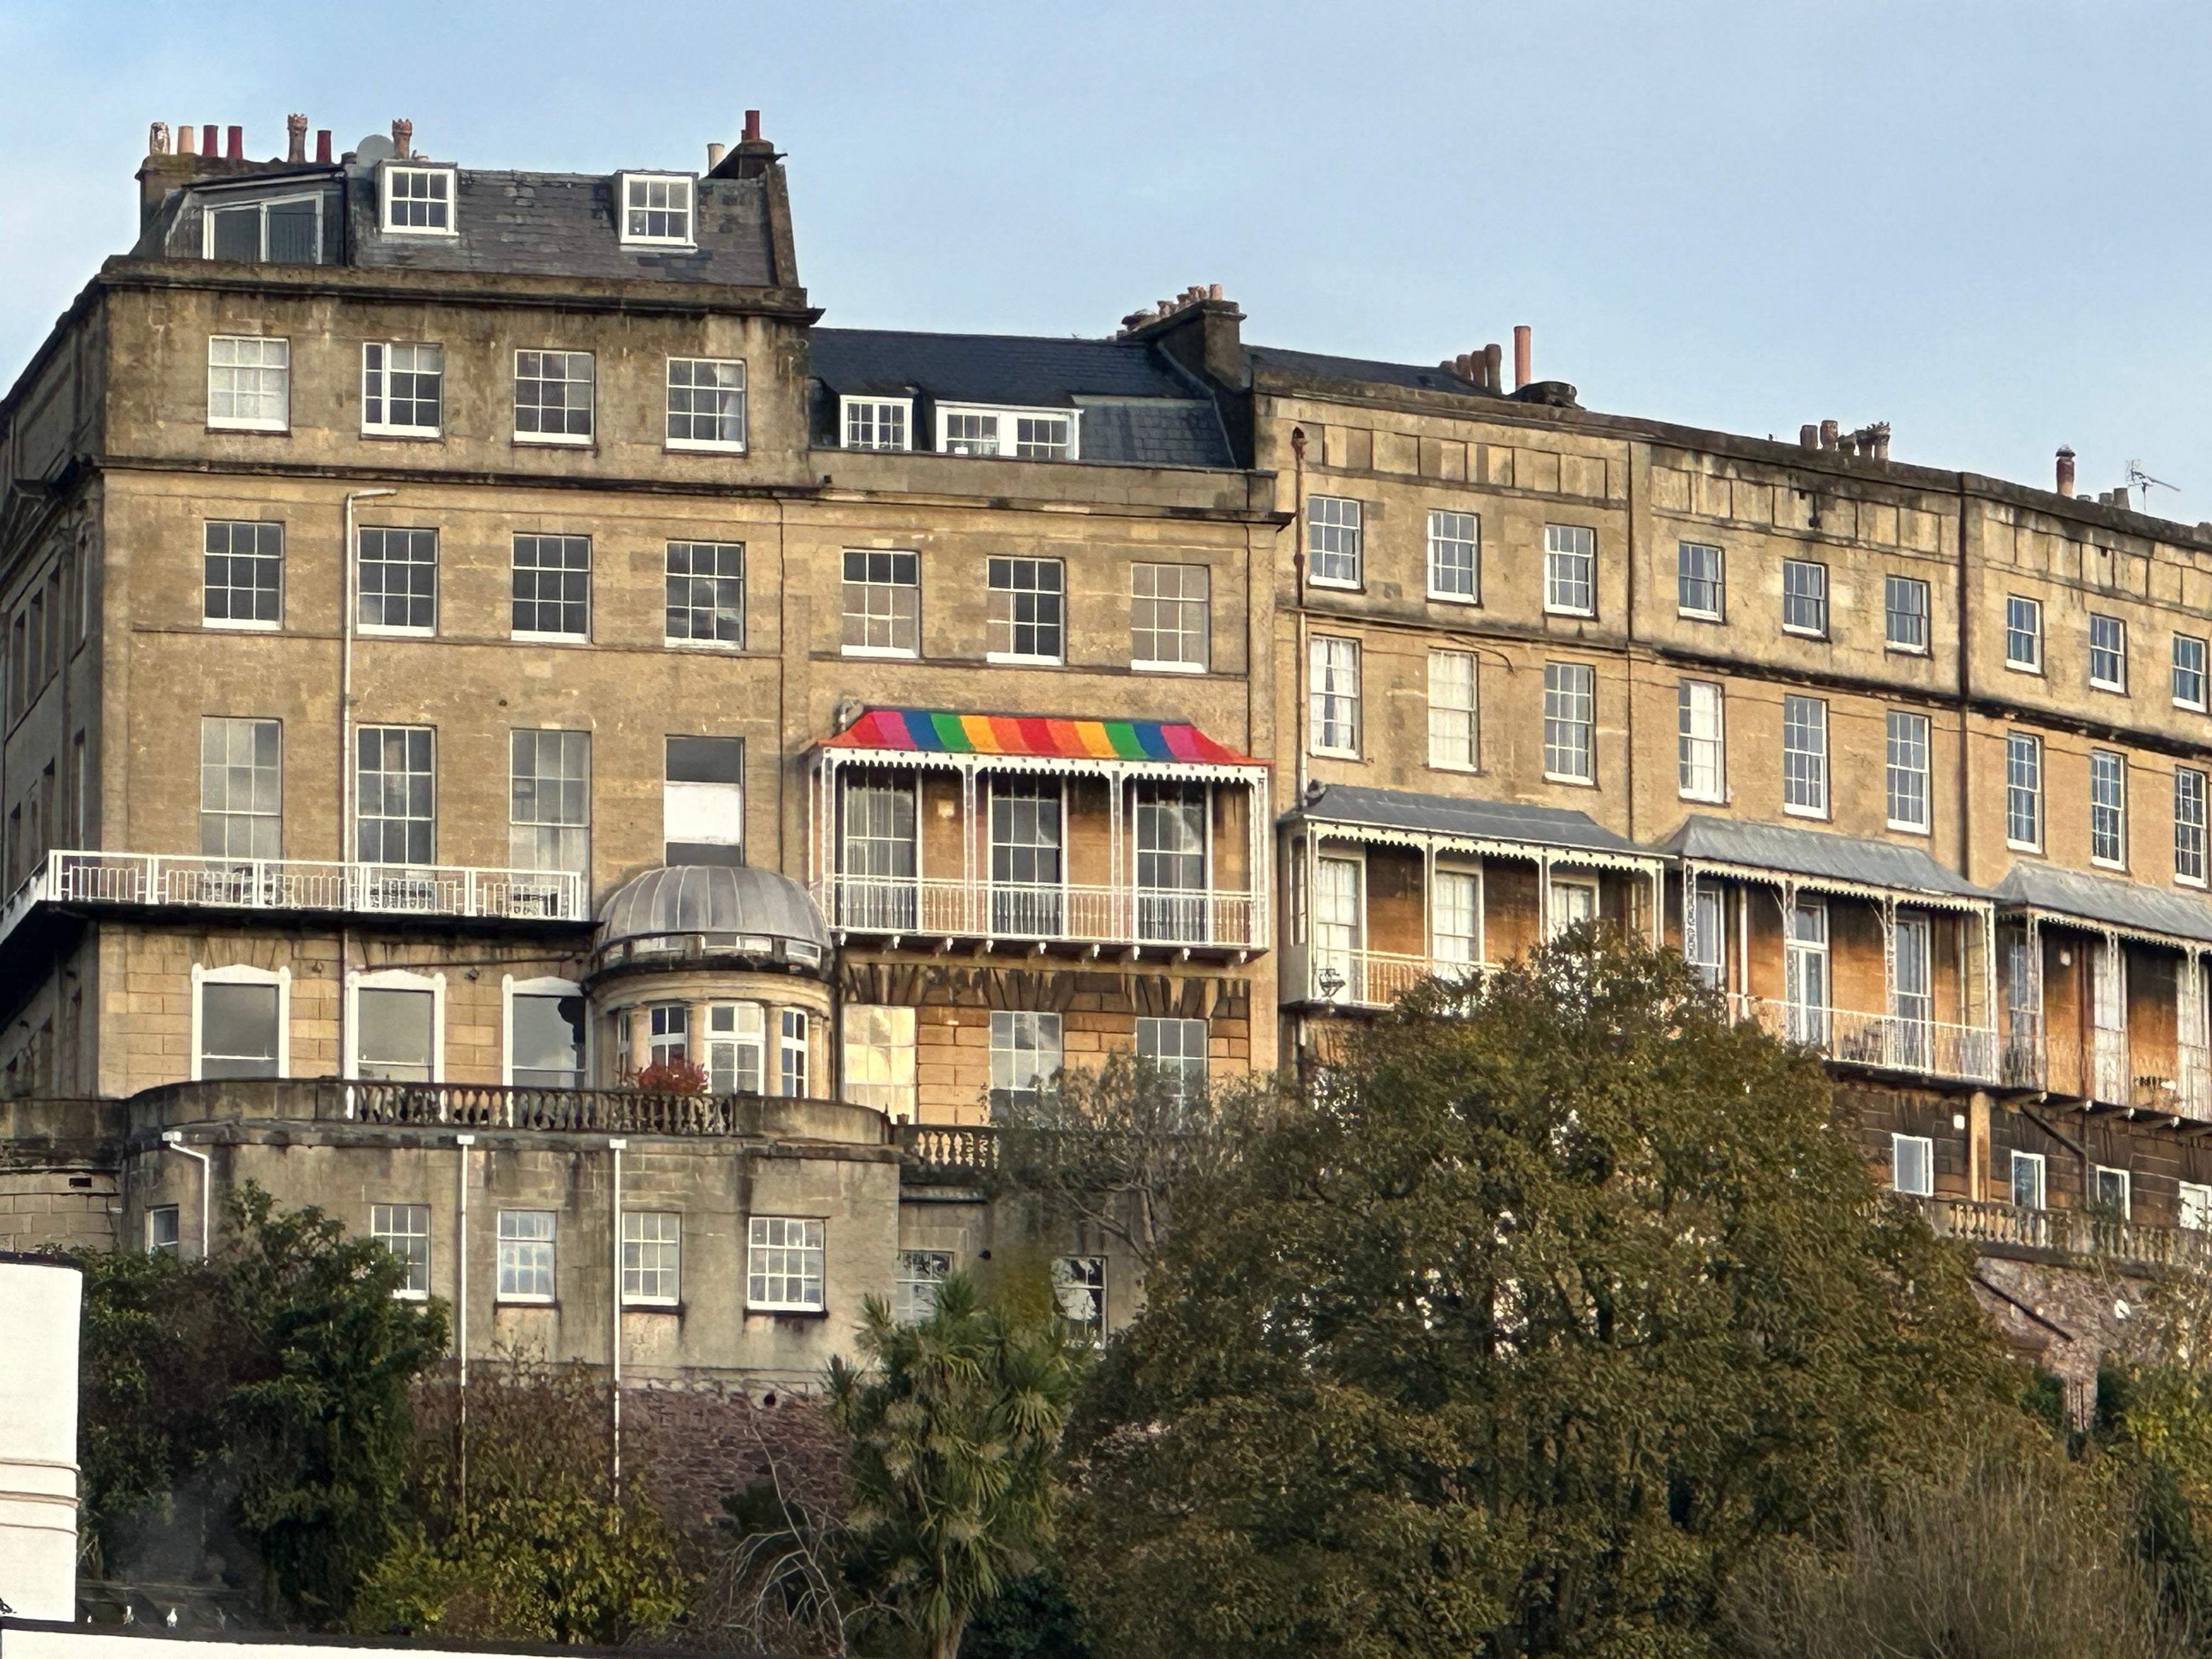 The canopy on the Georgian homes in Bristol was painted in the rainbow colours in October 2022 - but will now be repained